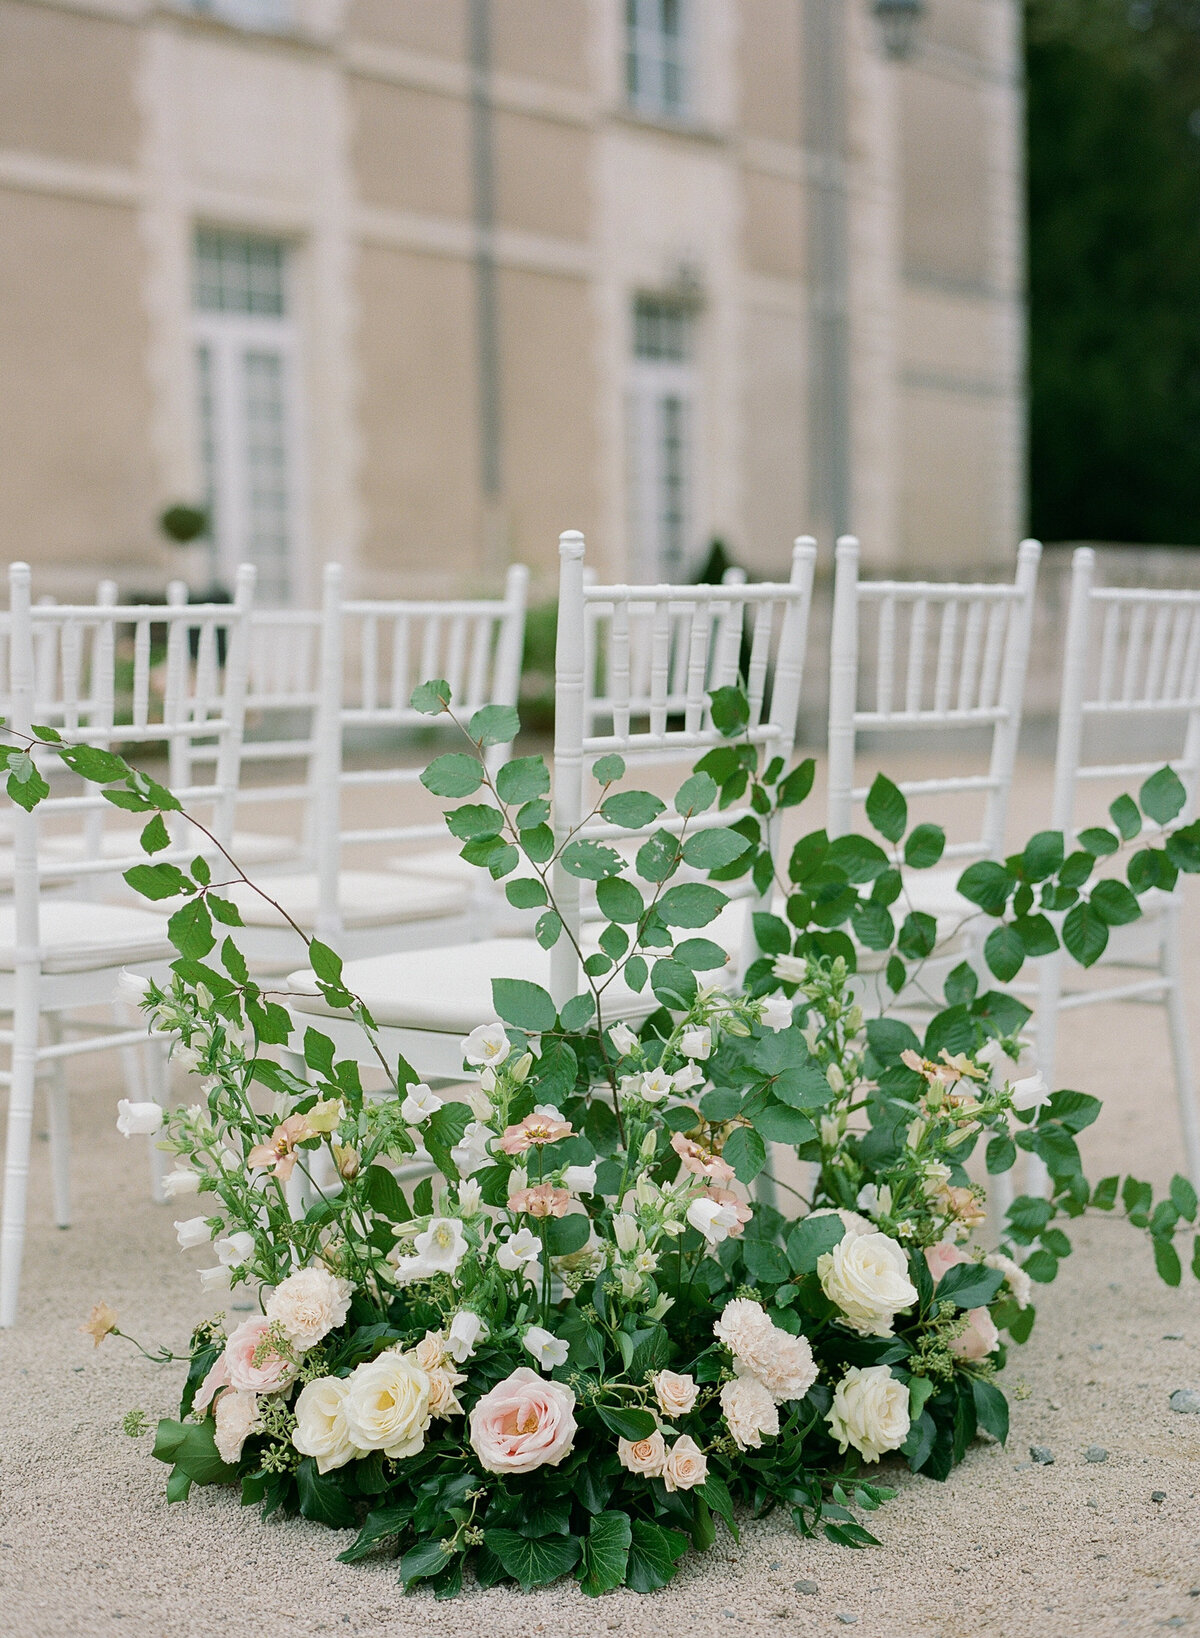 Jennifer Fox Weddings English speaking wedding planning & design agency in France crafting refined and bespoke weddings and celebrations Provence, Paris and destination Molly-Carr-Photography-Natalie-Ryan-Ceremony-14